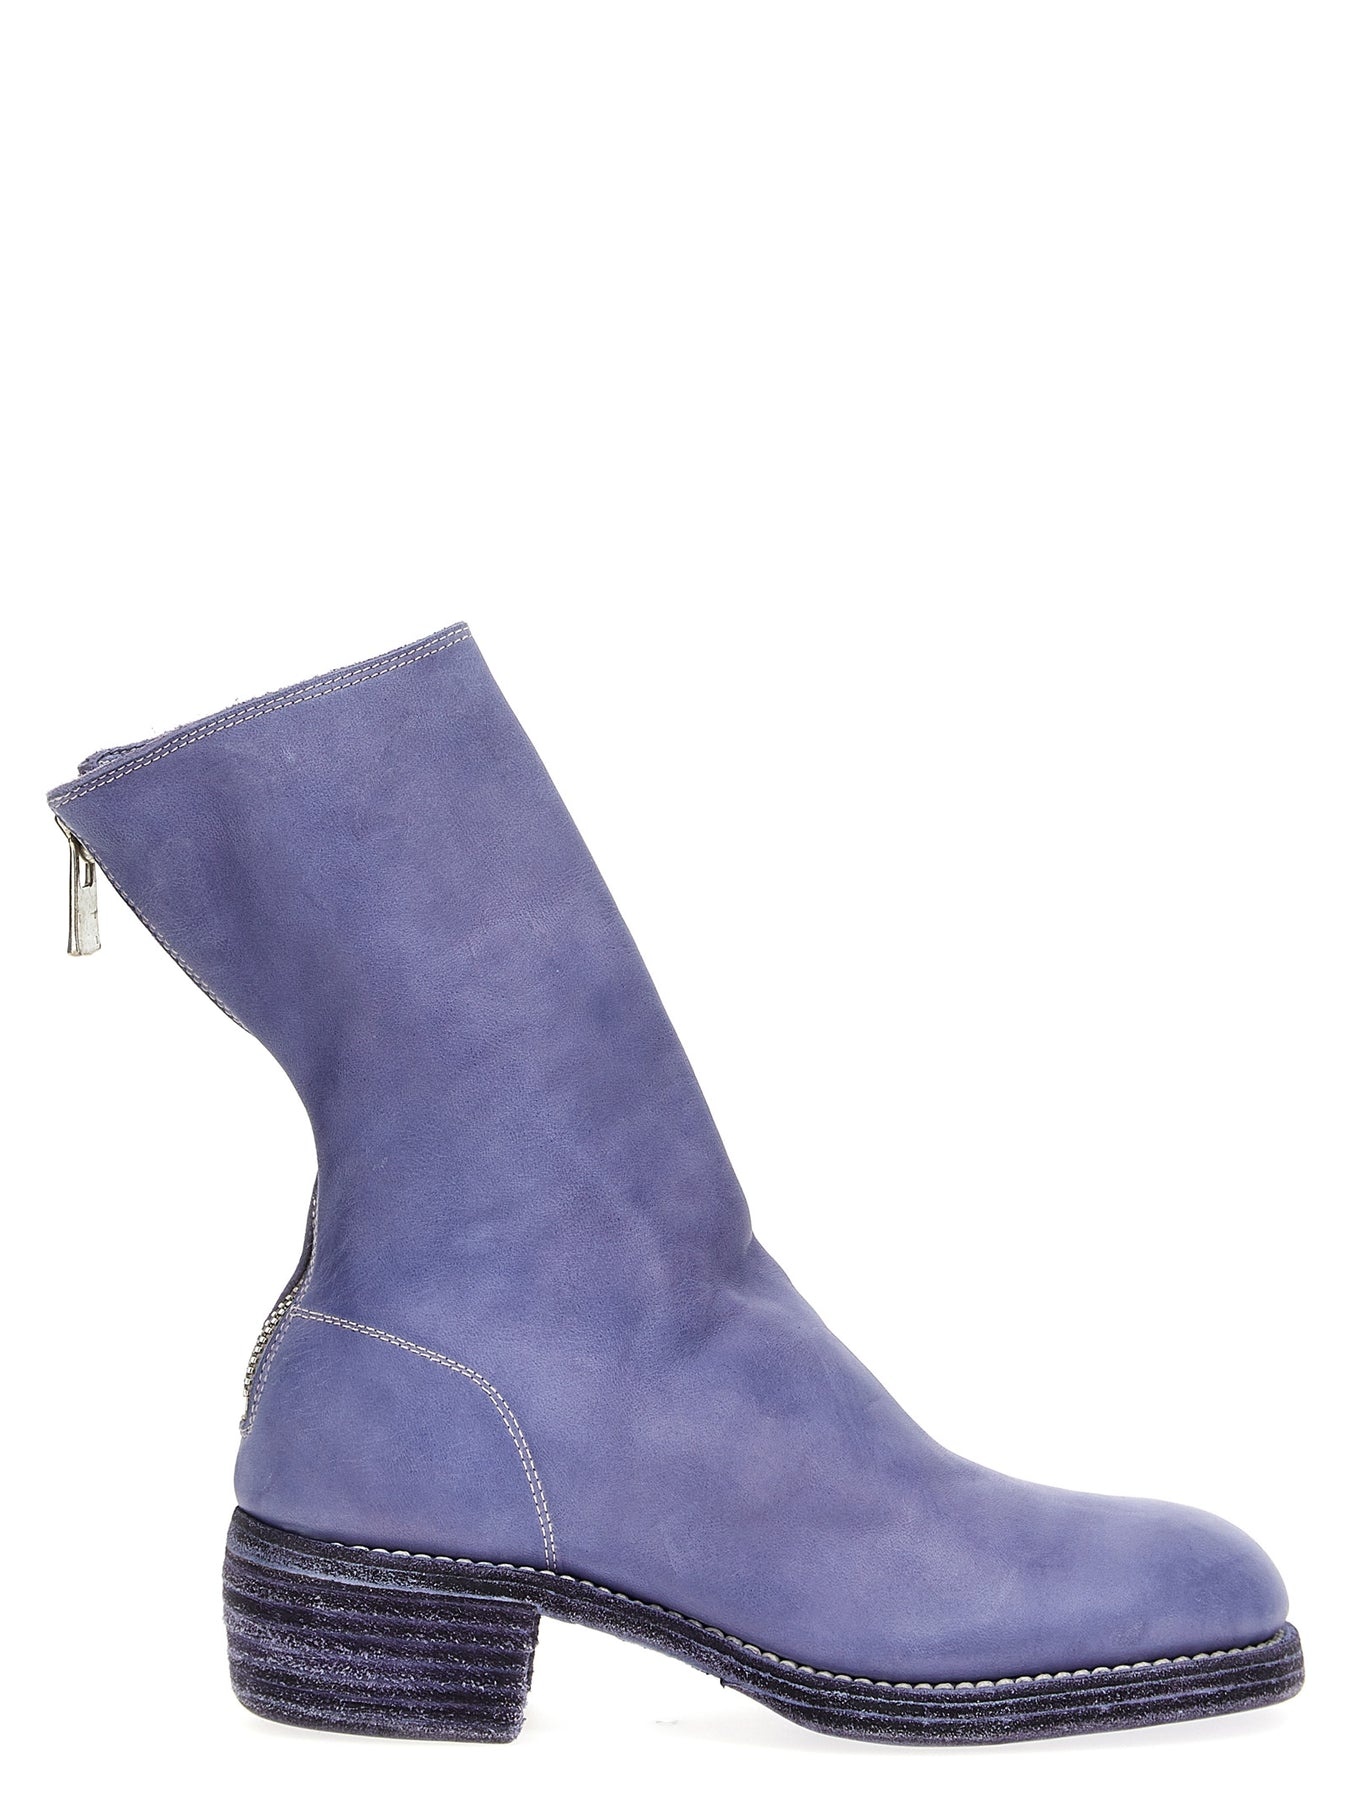 788zx Boots, Ankle Boots Purple - 1